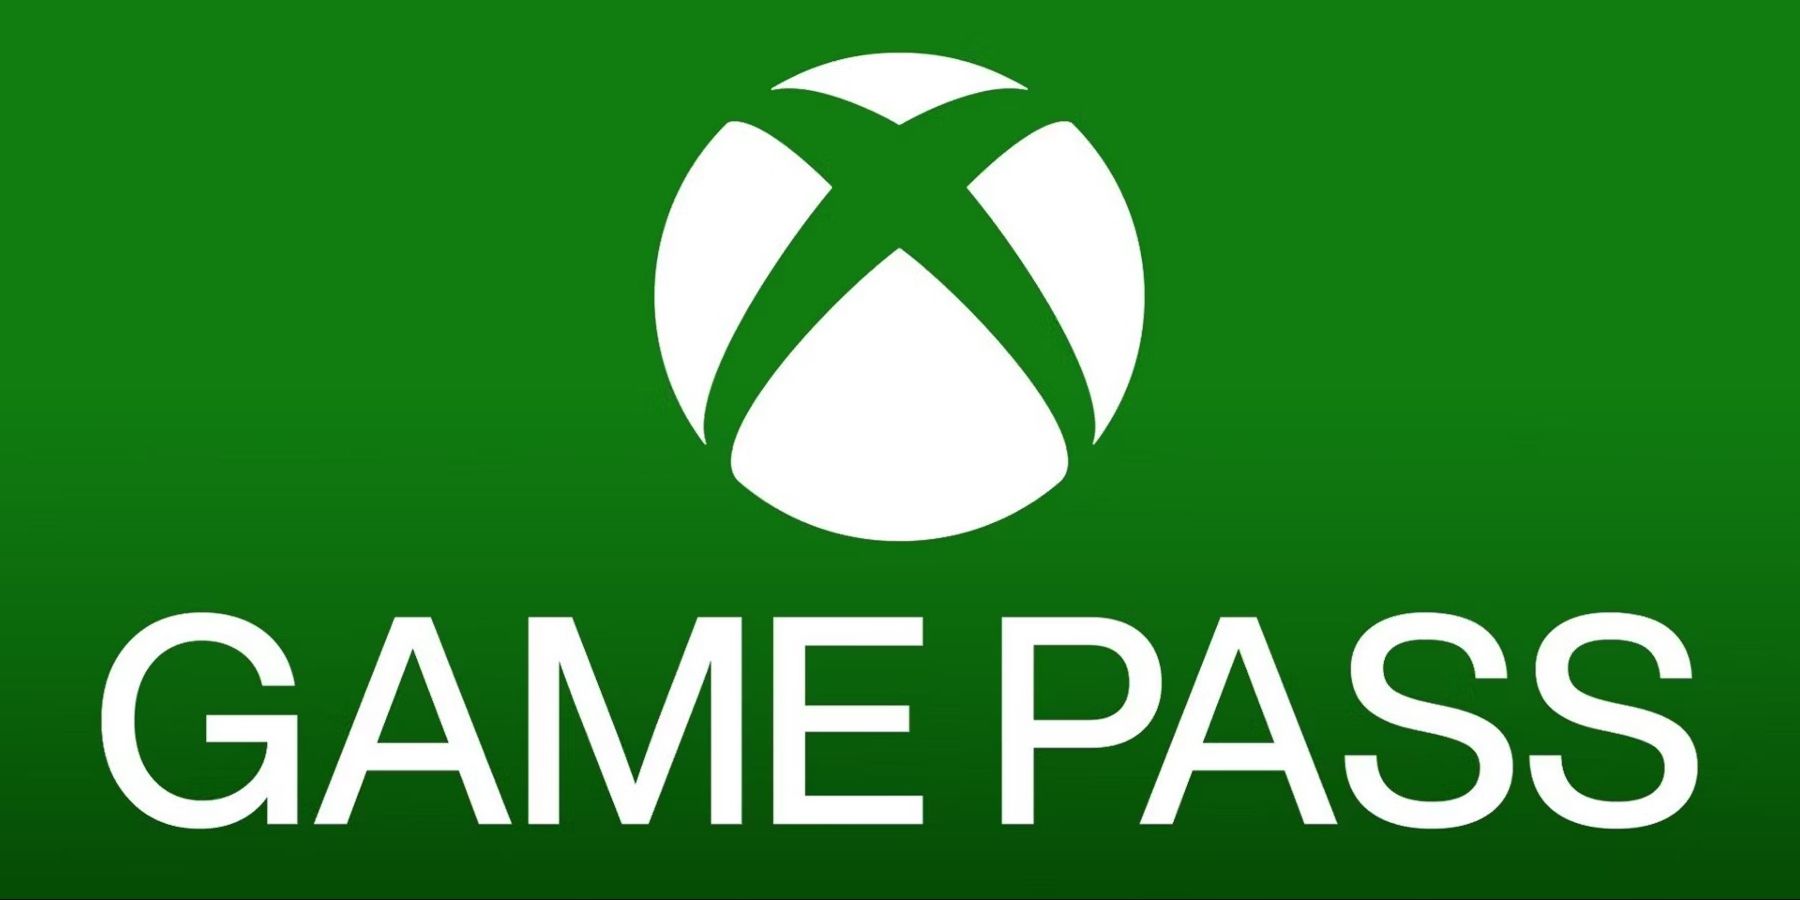 When asked if price increases for Xbox Game Pass are unavoidable